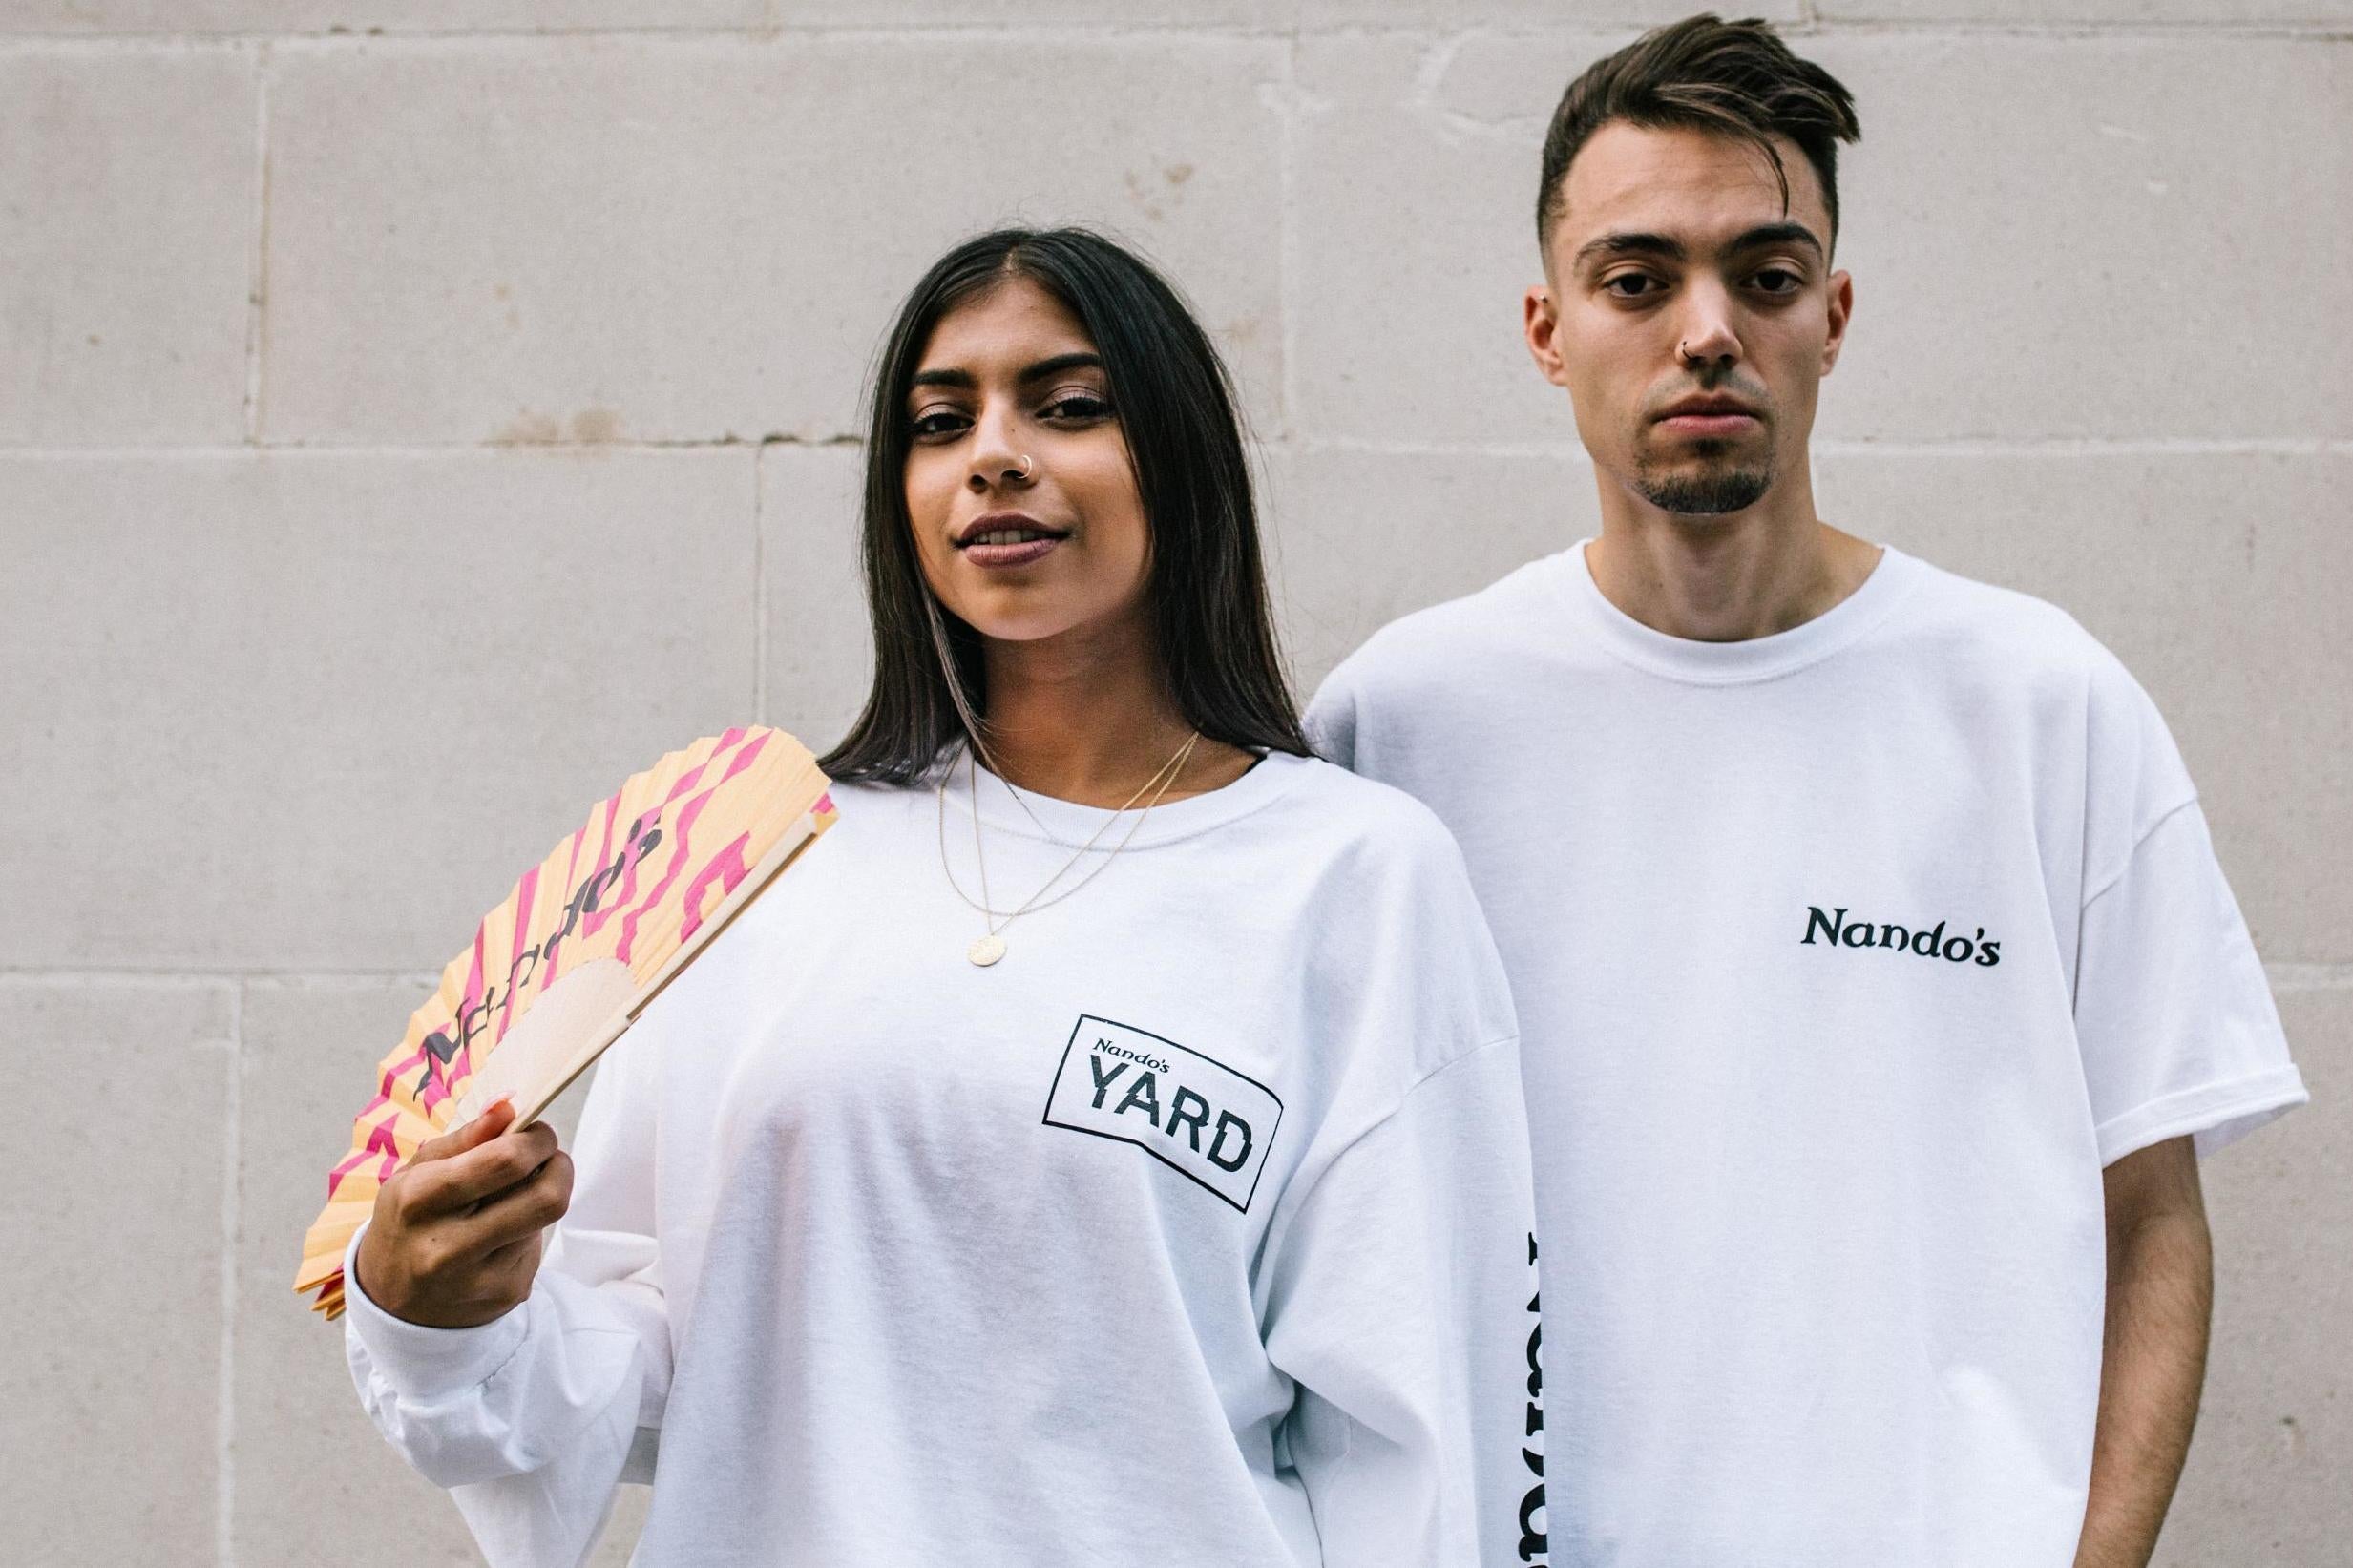 Nando's is launching a capsule clothing collection (Nando's)